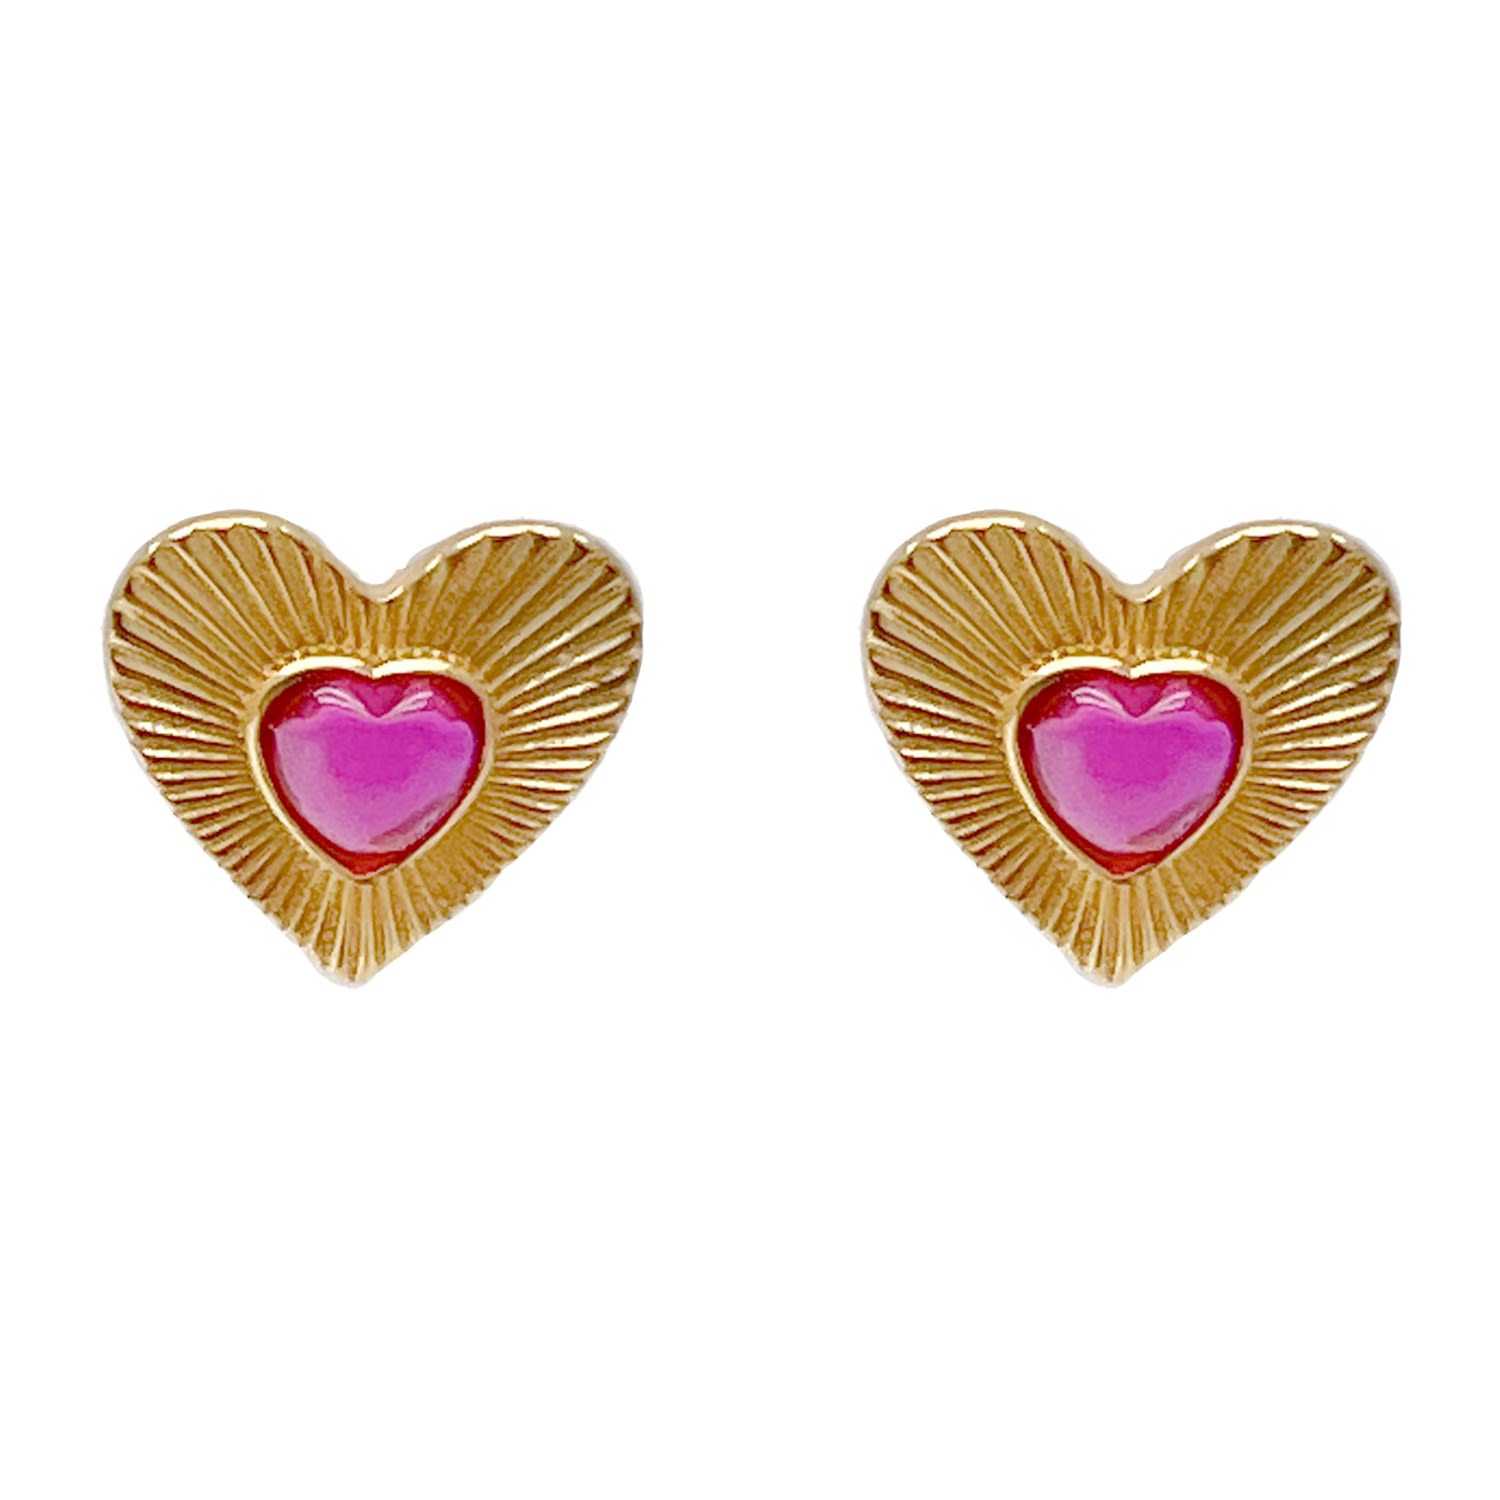 Women’s Heart Shape Gold Plated Silver With Red Zircon Earrings Ms. Donna